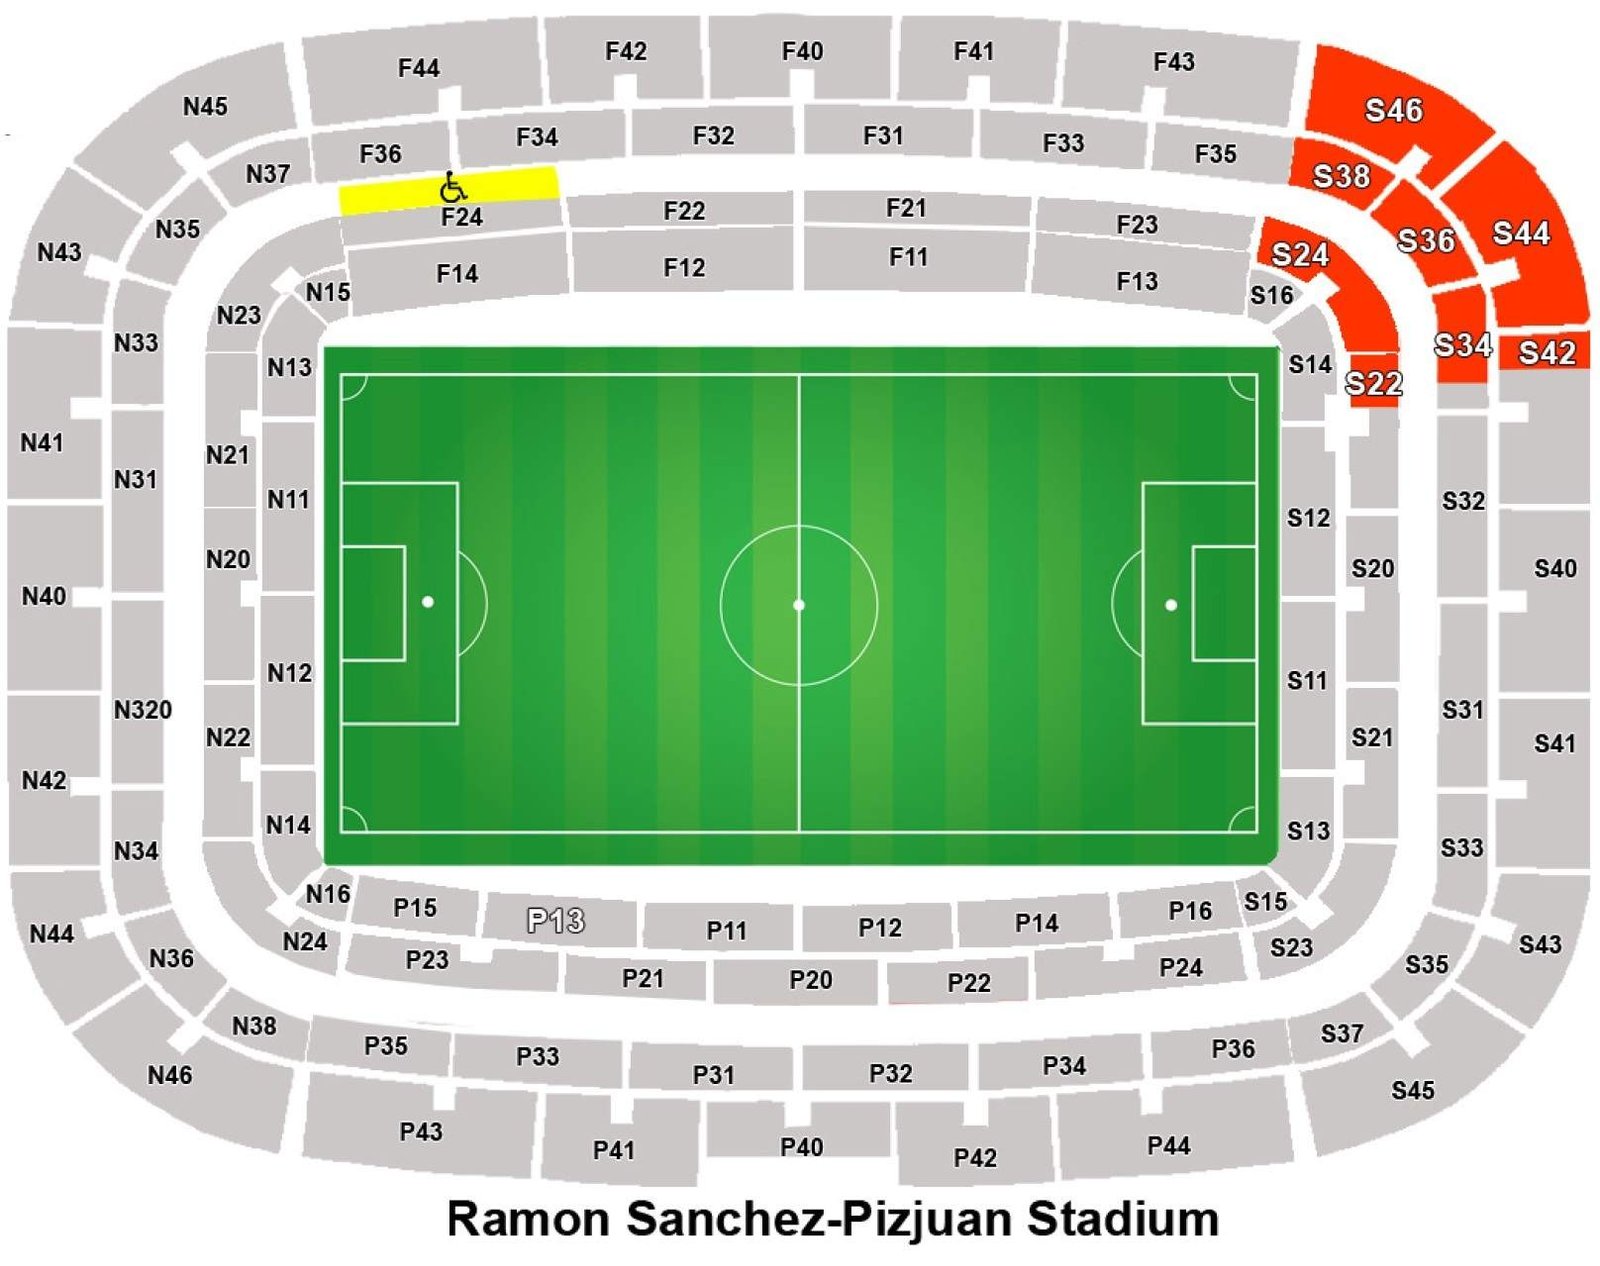 Ramon Sanchez Pizjuan Seating Plan with Rows and Seat Numbers